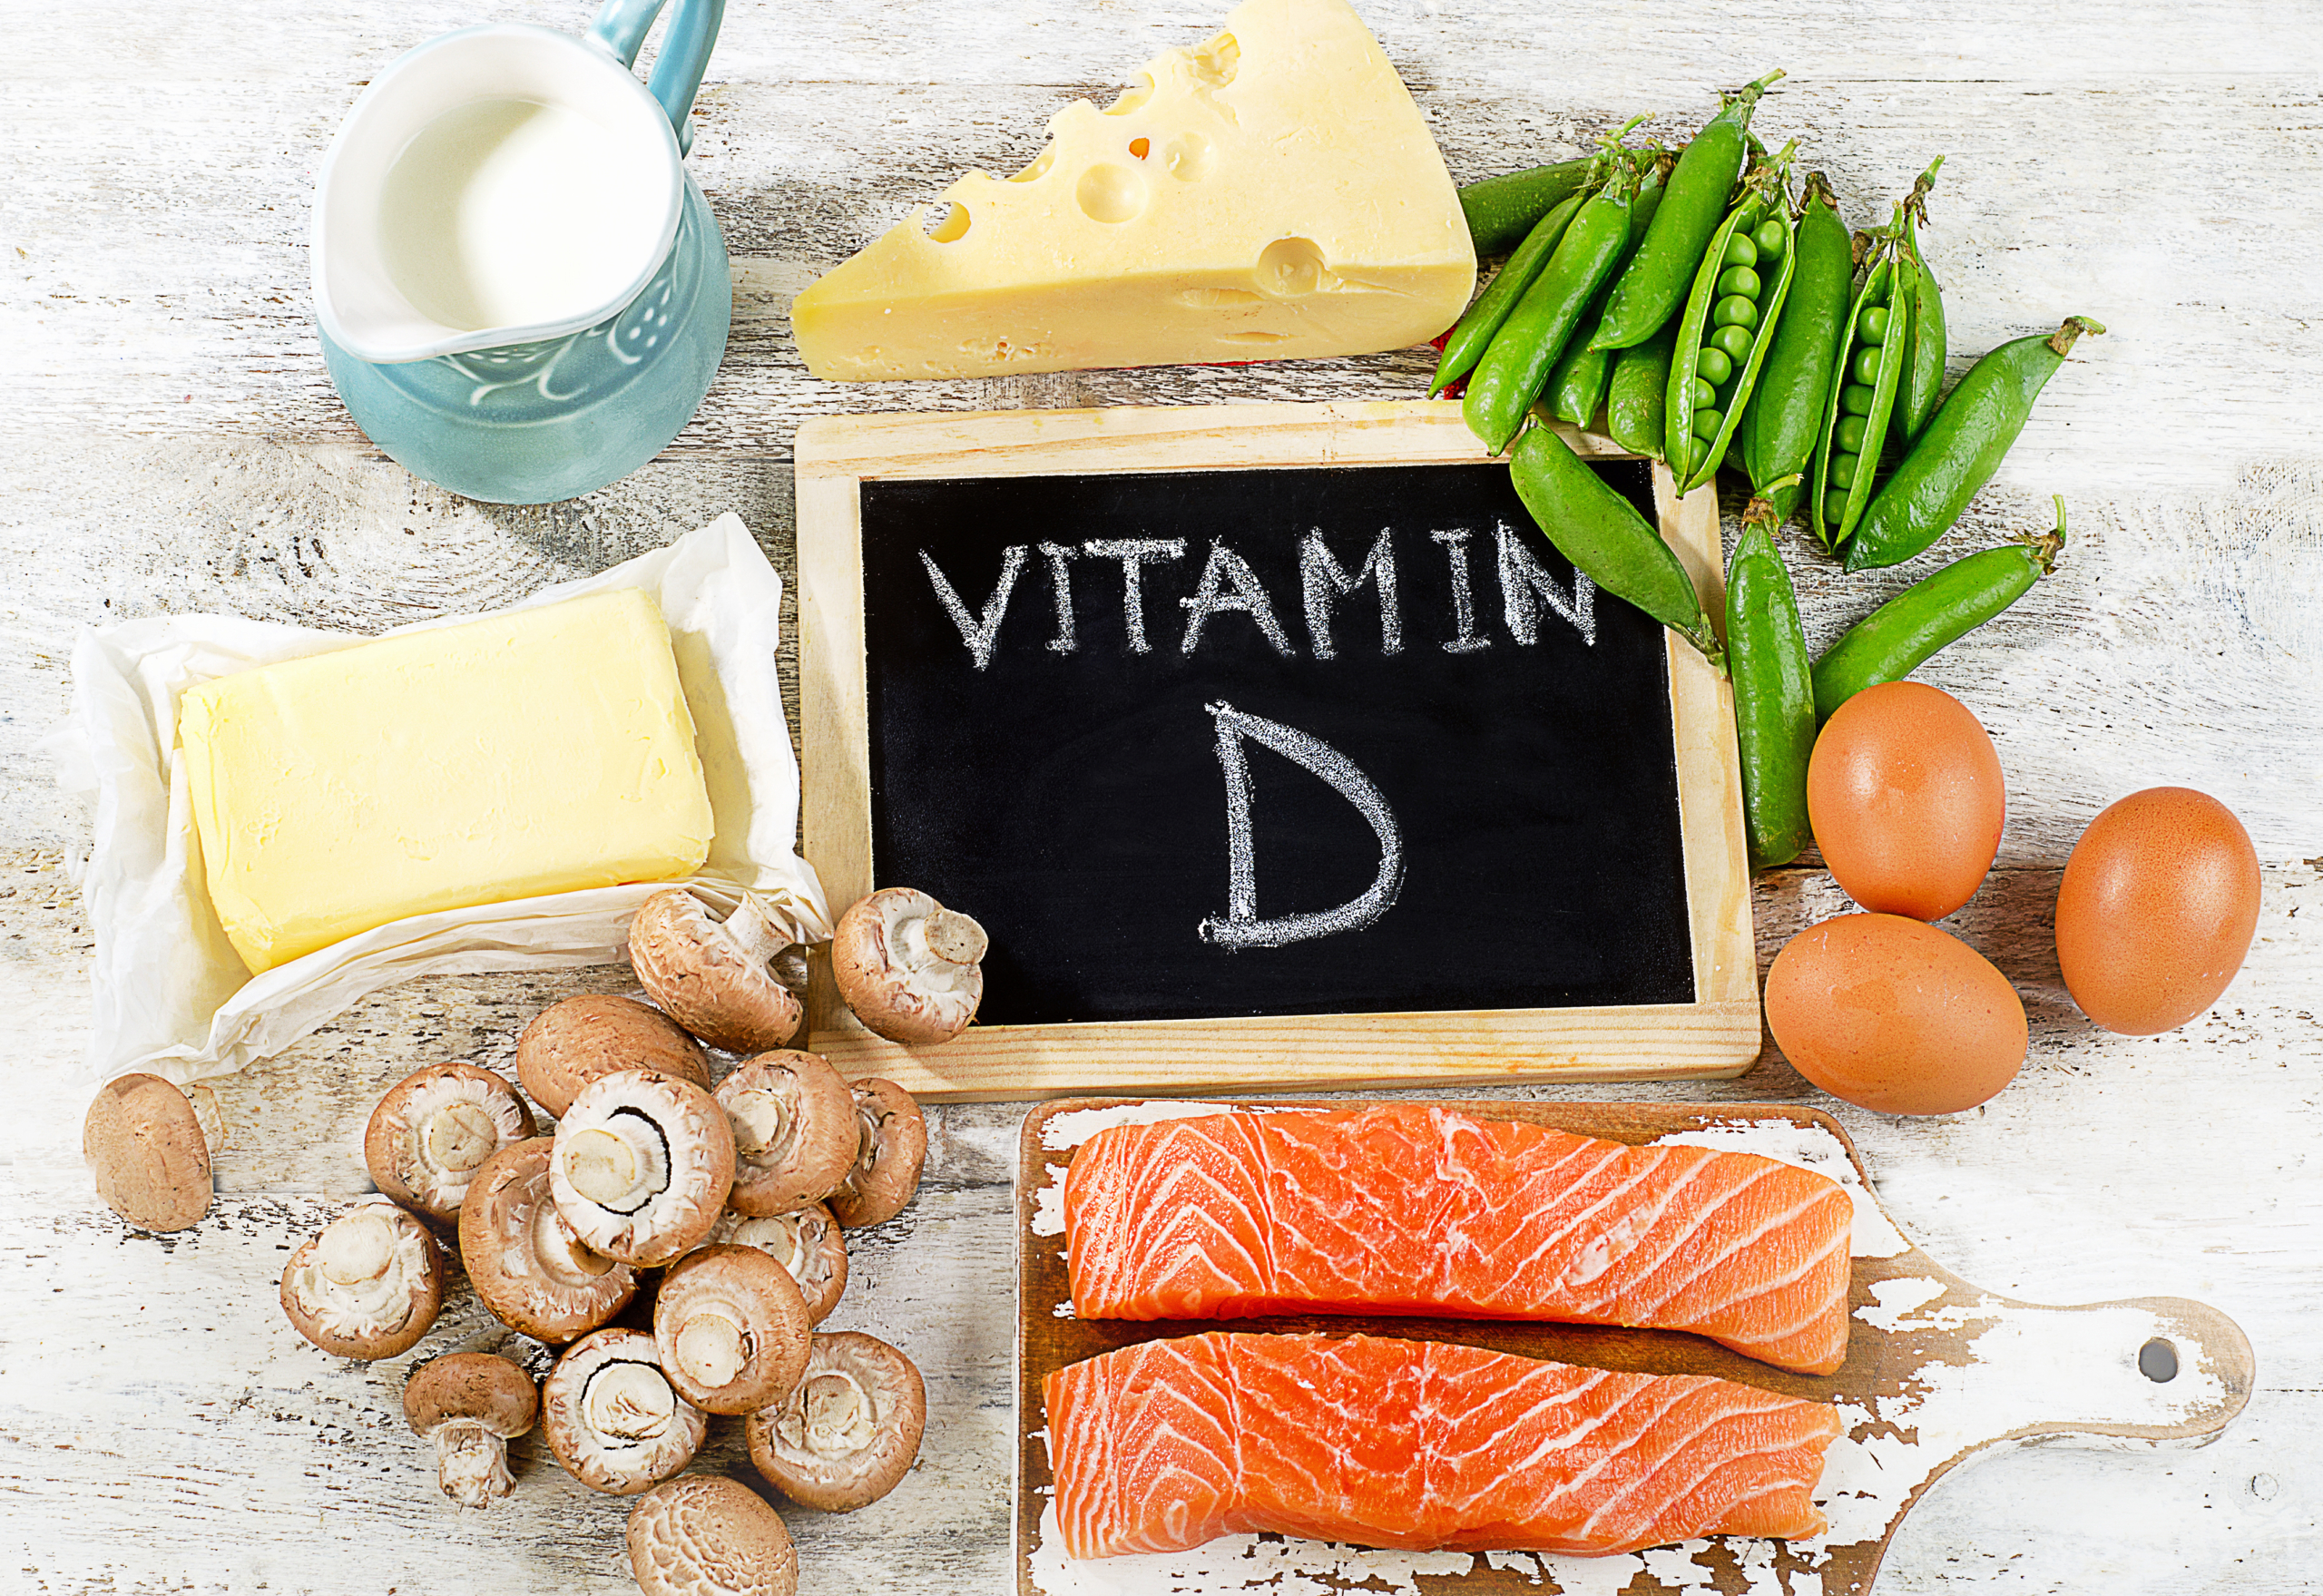 Vitamin D can be found in many different foods, although supplementation is sometimes needed.